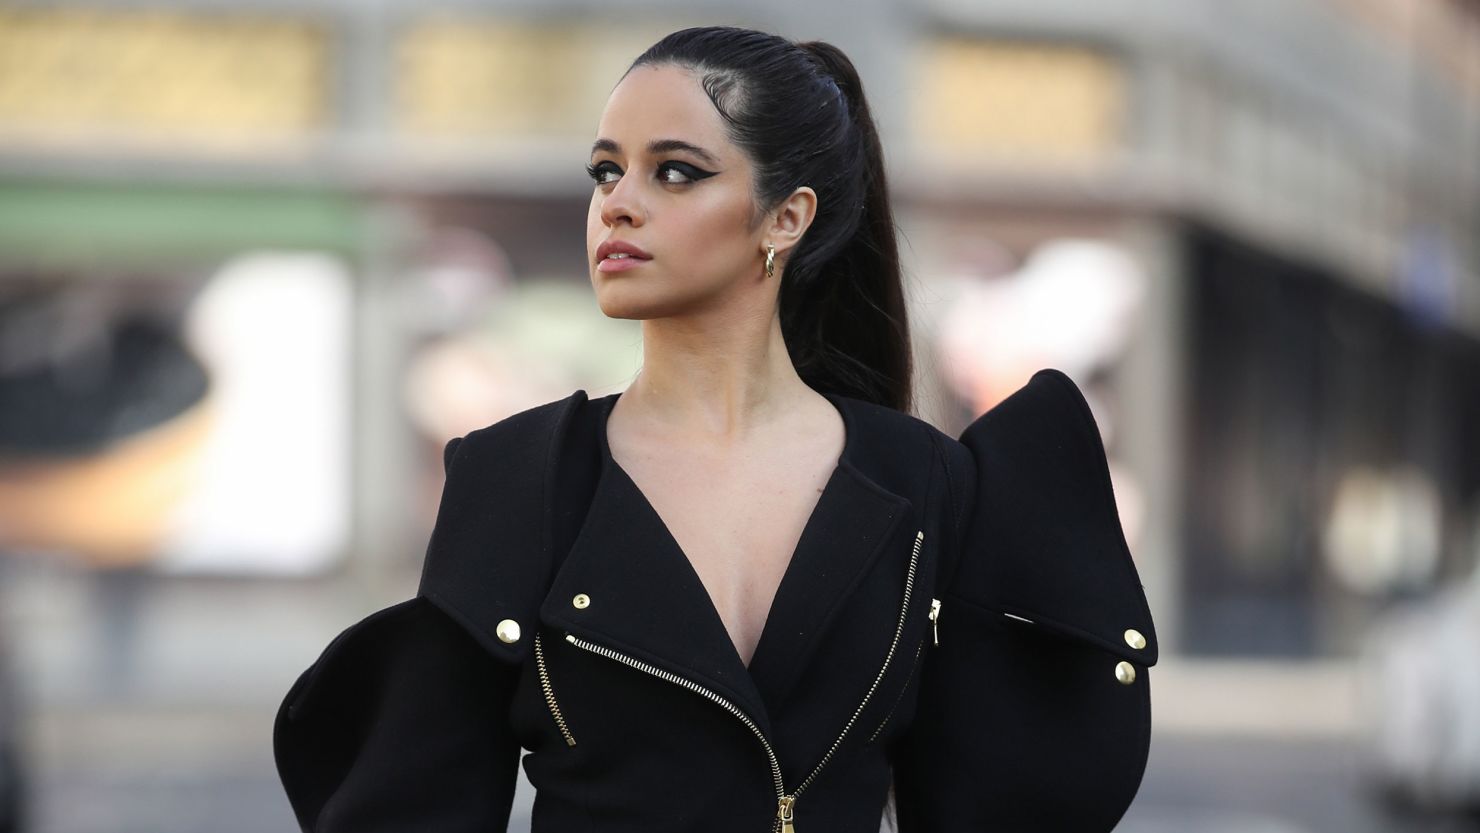 Singer and actress Camila Cabello opened up about her personal challenges with her self-esteem and body image on Instagram. 